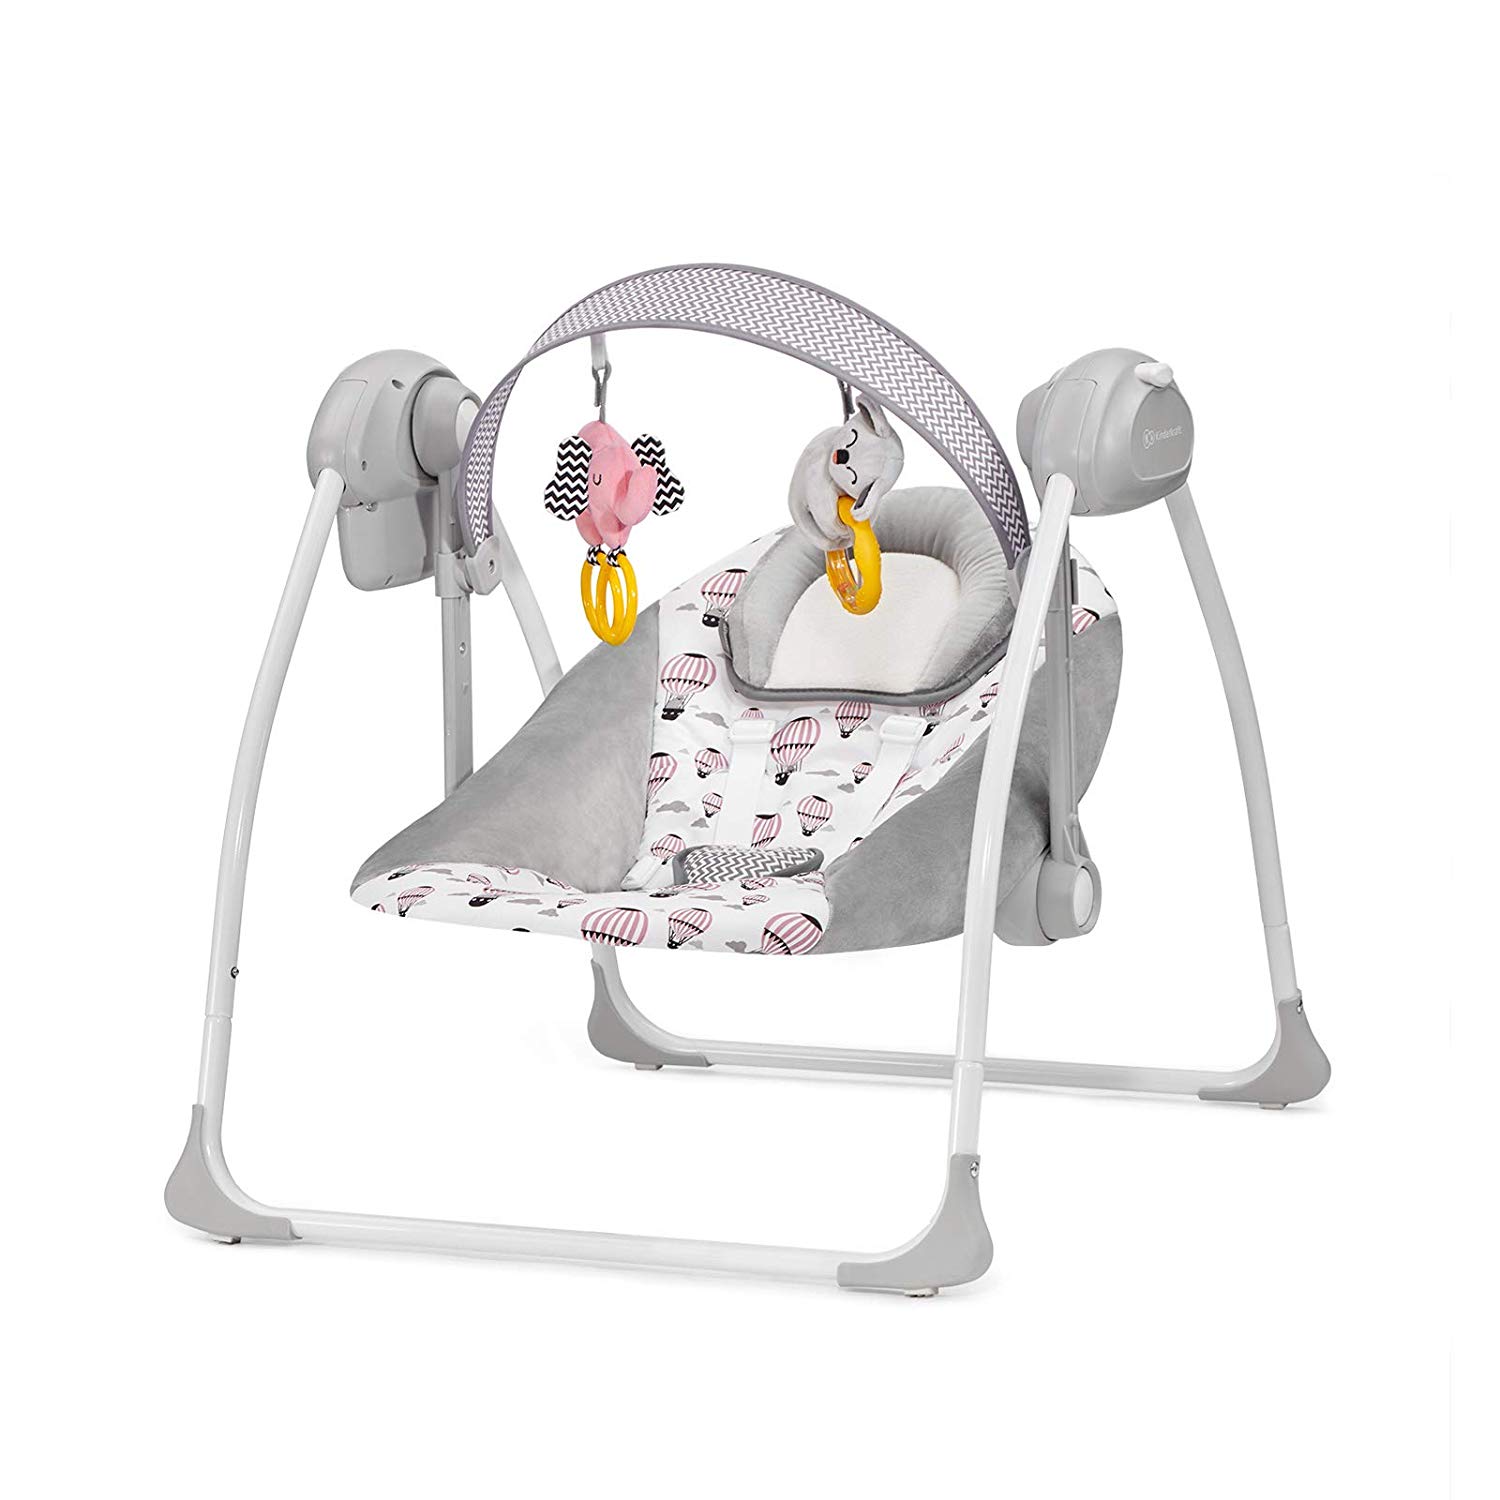 Kinderkraft KKBFLOPINK0000 Baby Rocker, Baby Swing with Play Arch and Melodies